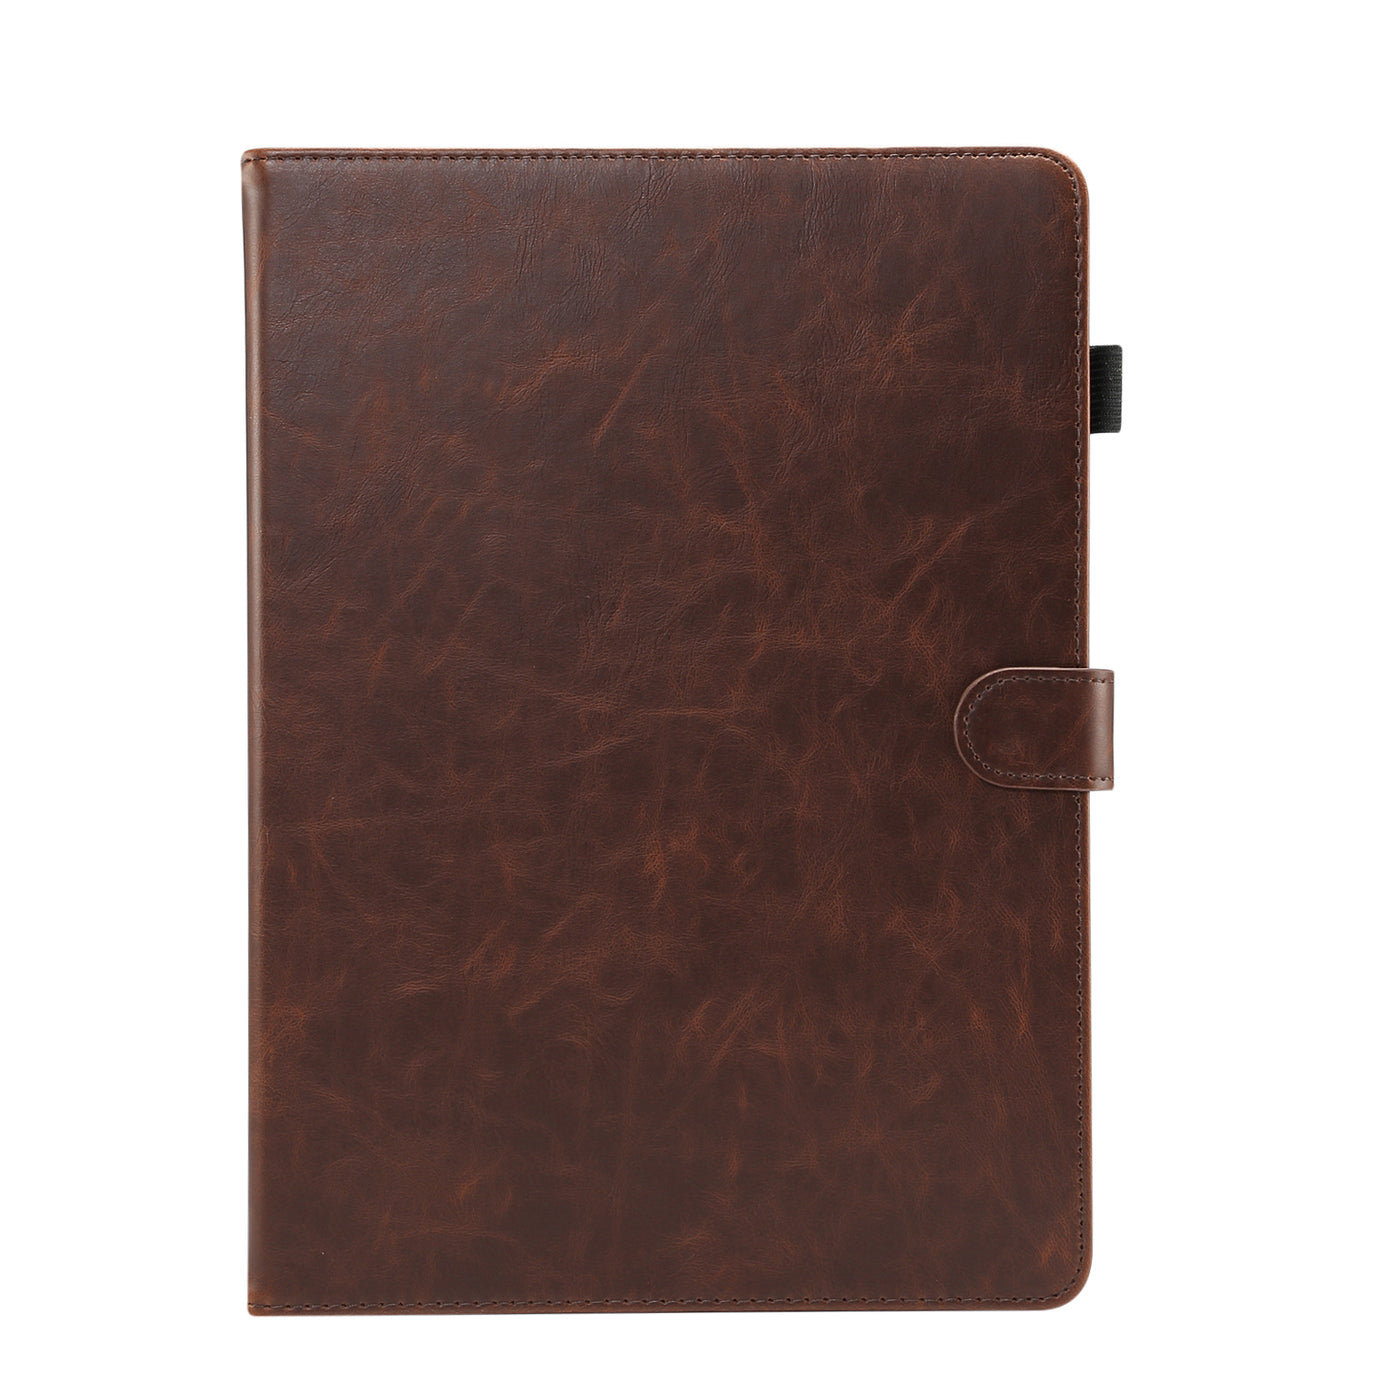 Apple iPad Air 10.9 inch (4th Gen) coffee color leather wallet flip cover case By excelsior